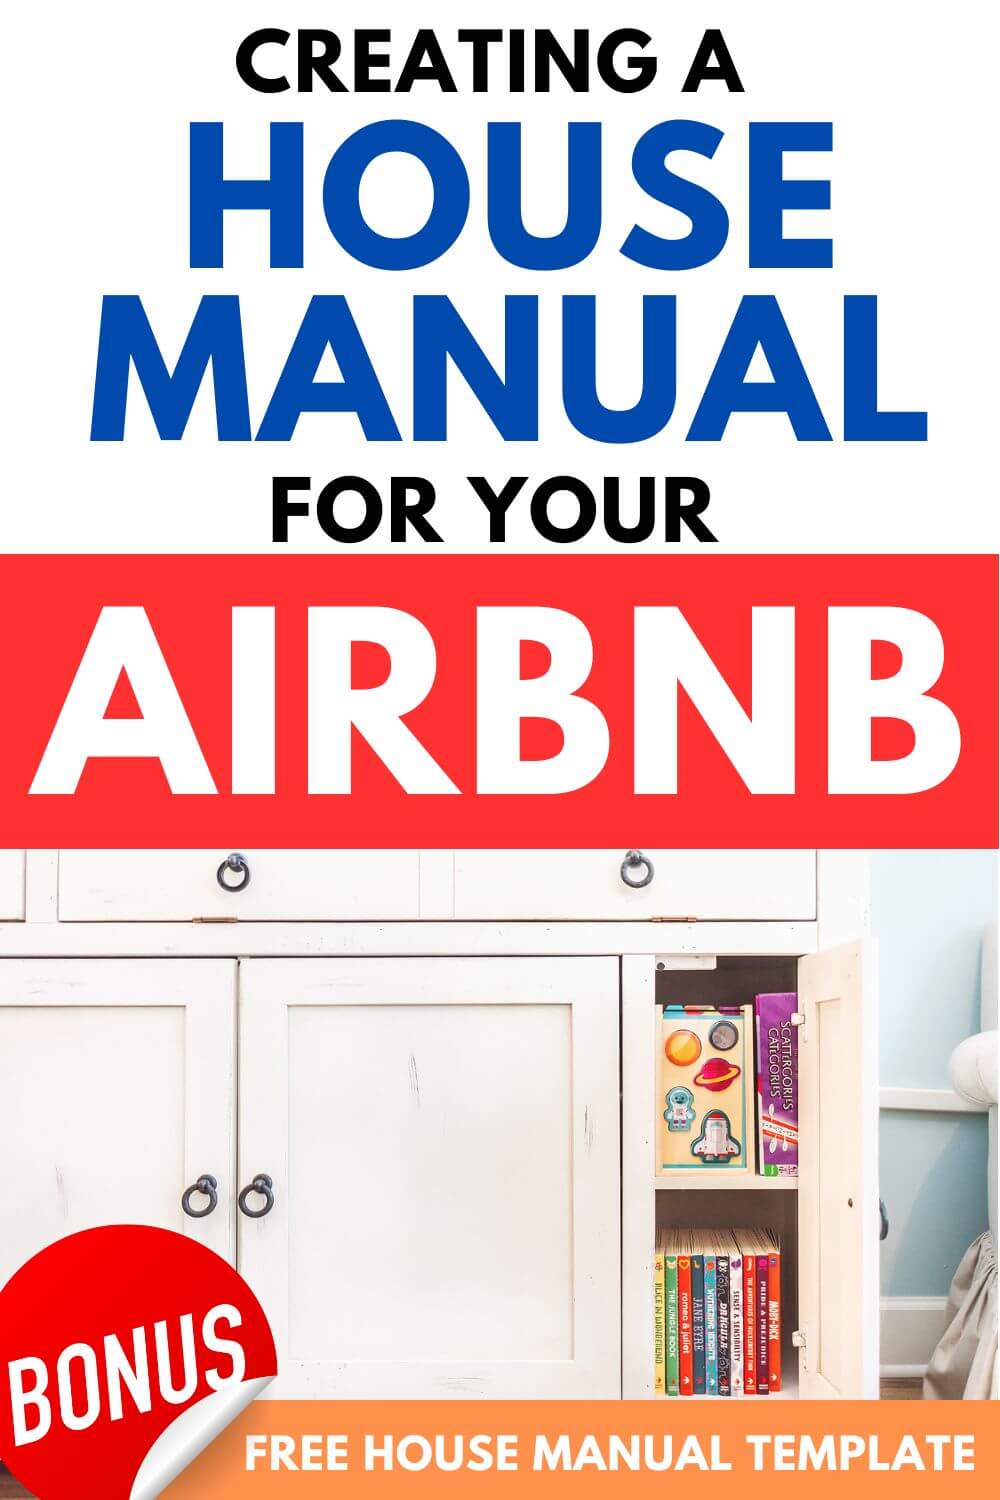 Creating A House Manual For Your Airbnb Short Term Rental